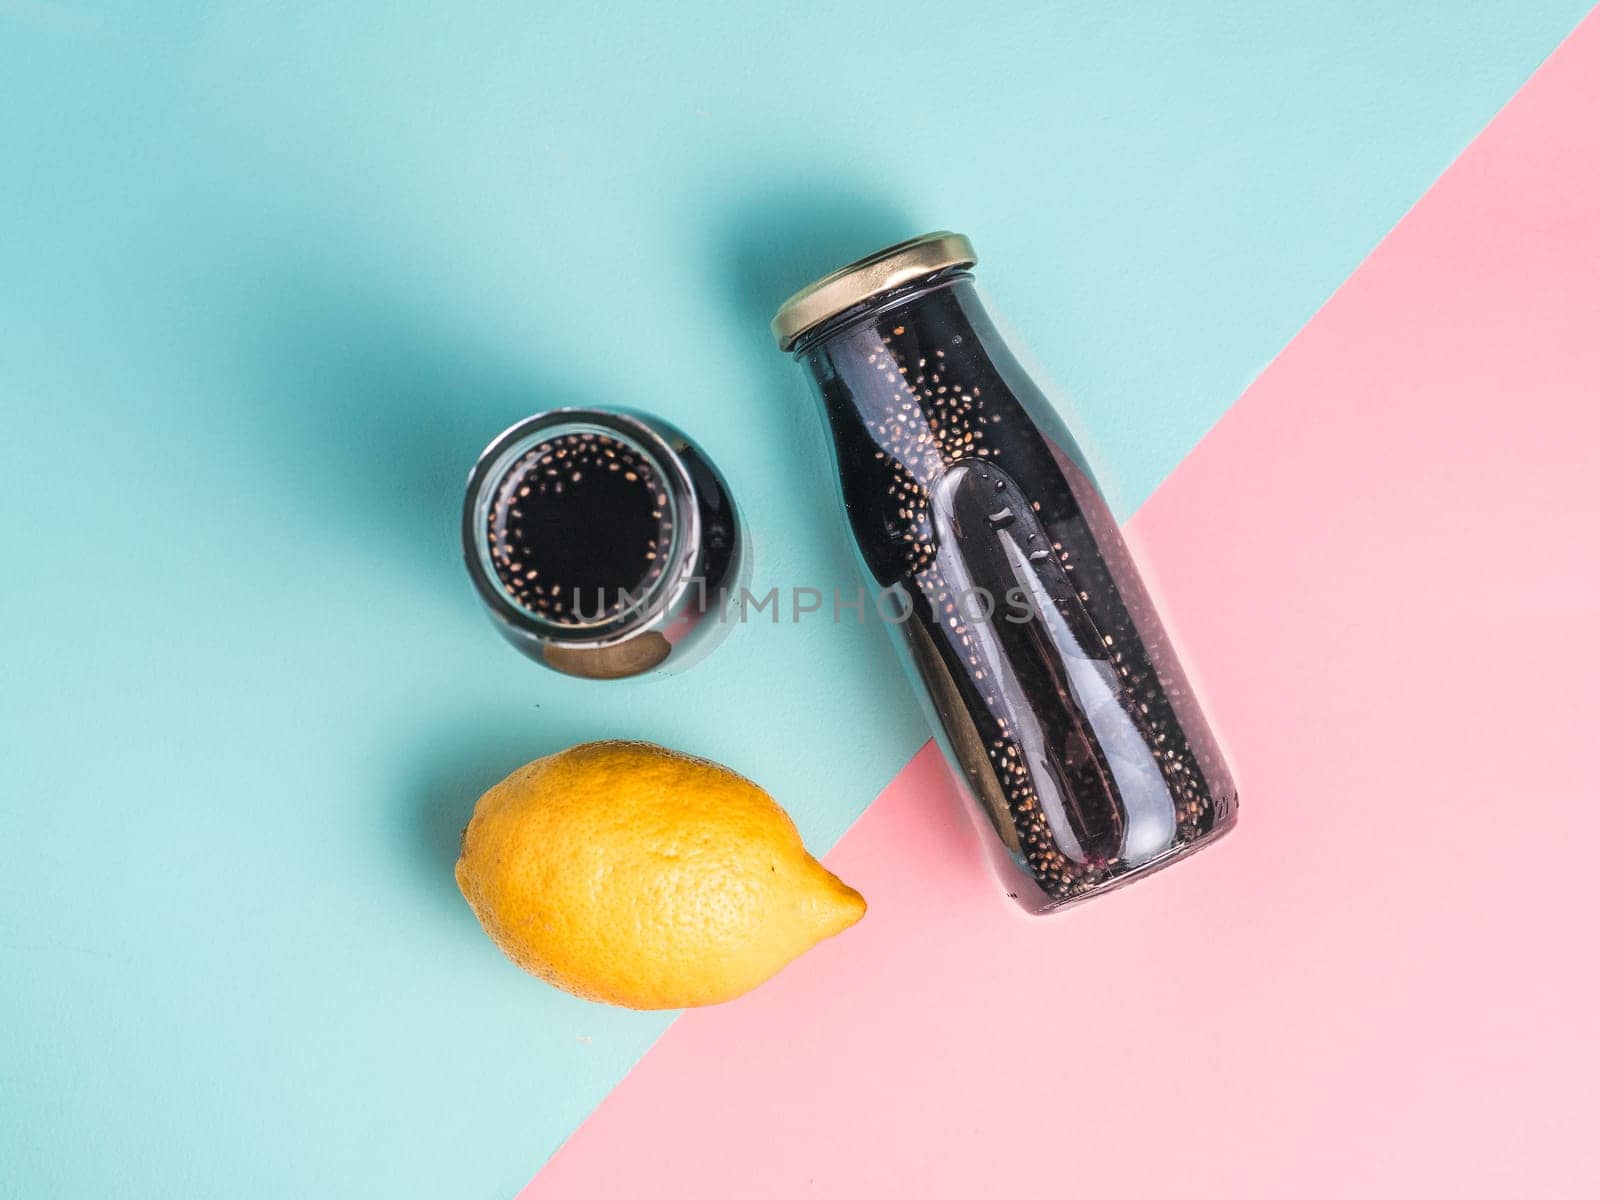 Detox activated charcoal black chia water or lemonade with lemon on colorful blue and pink background.Two bottle with black chia infused water.Detox drink idea and recipe.Vegan food and drink.Top view